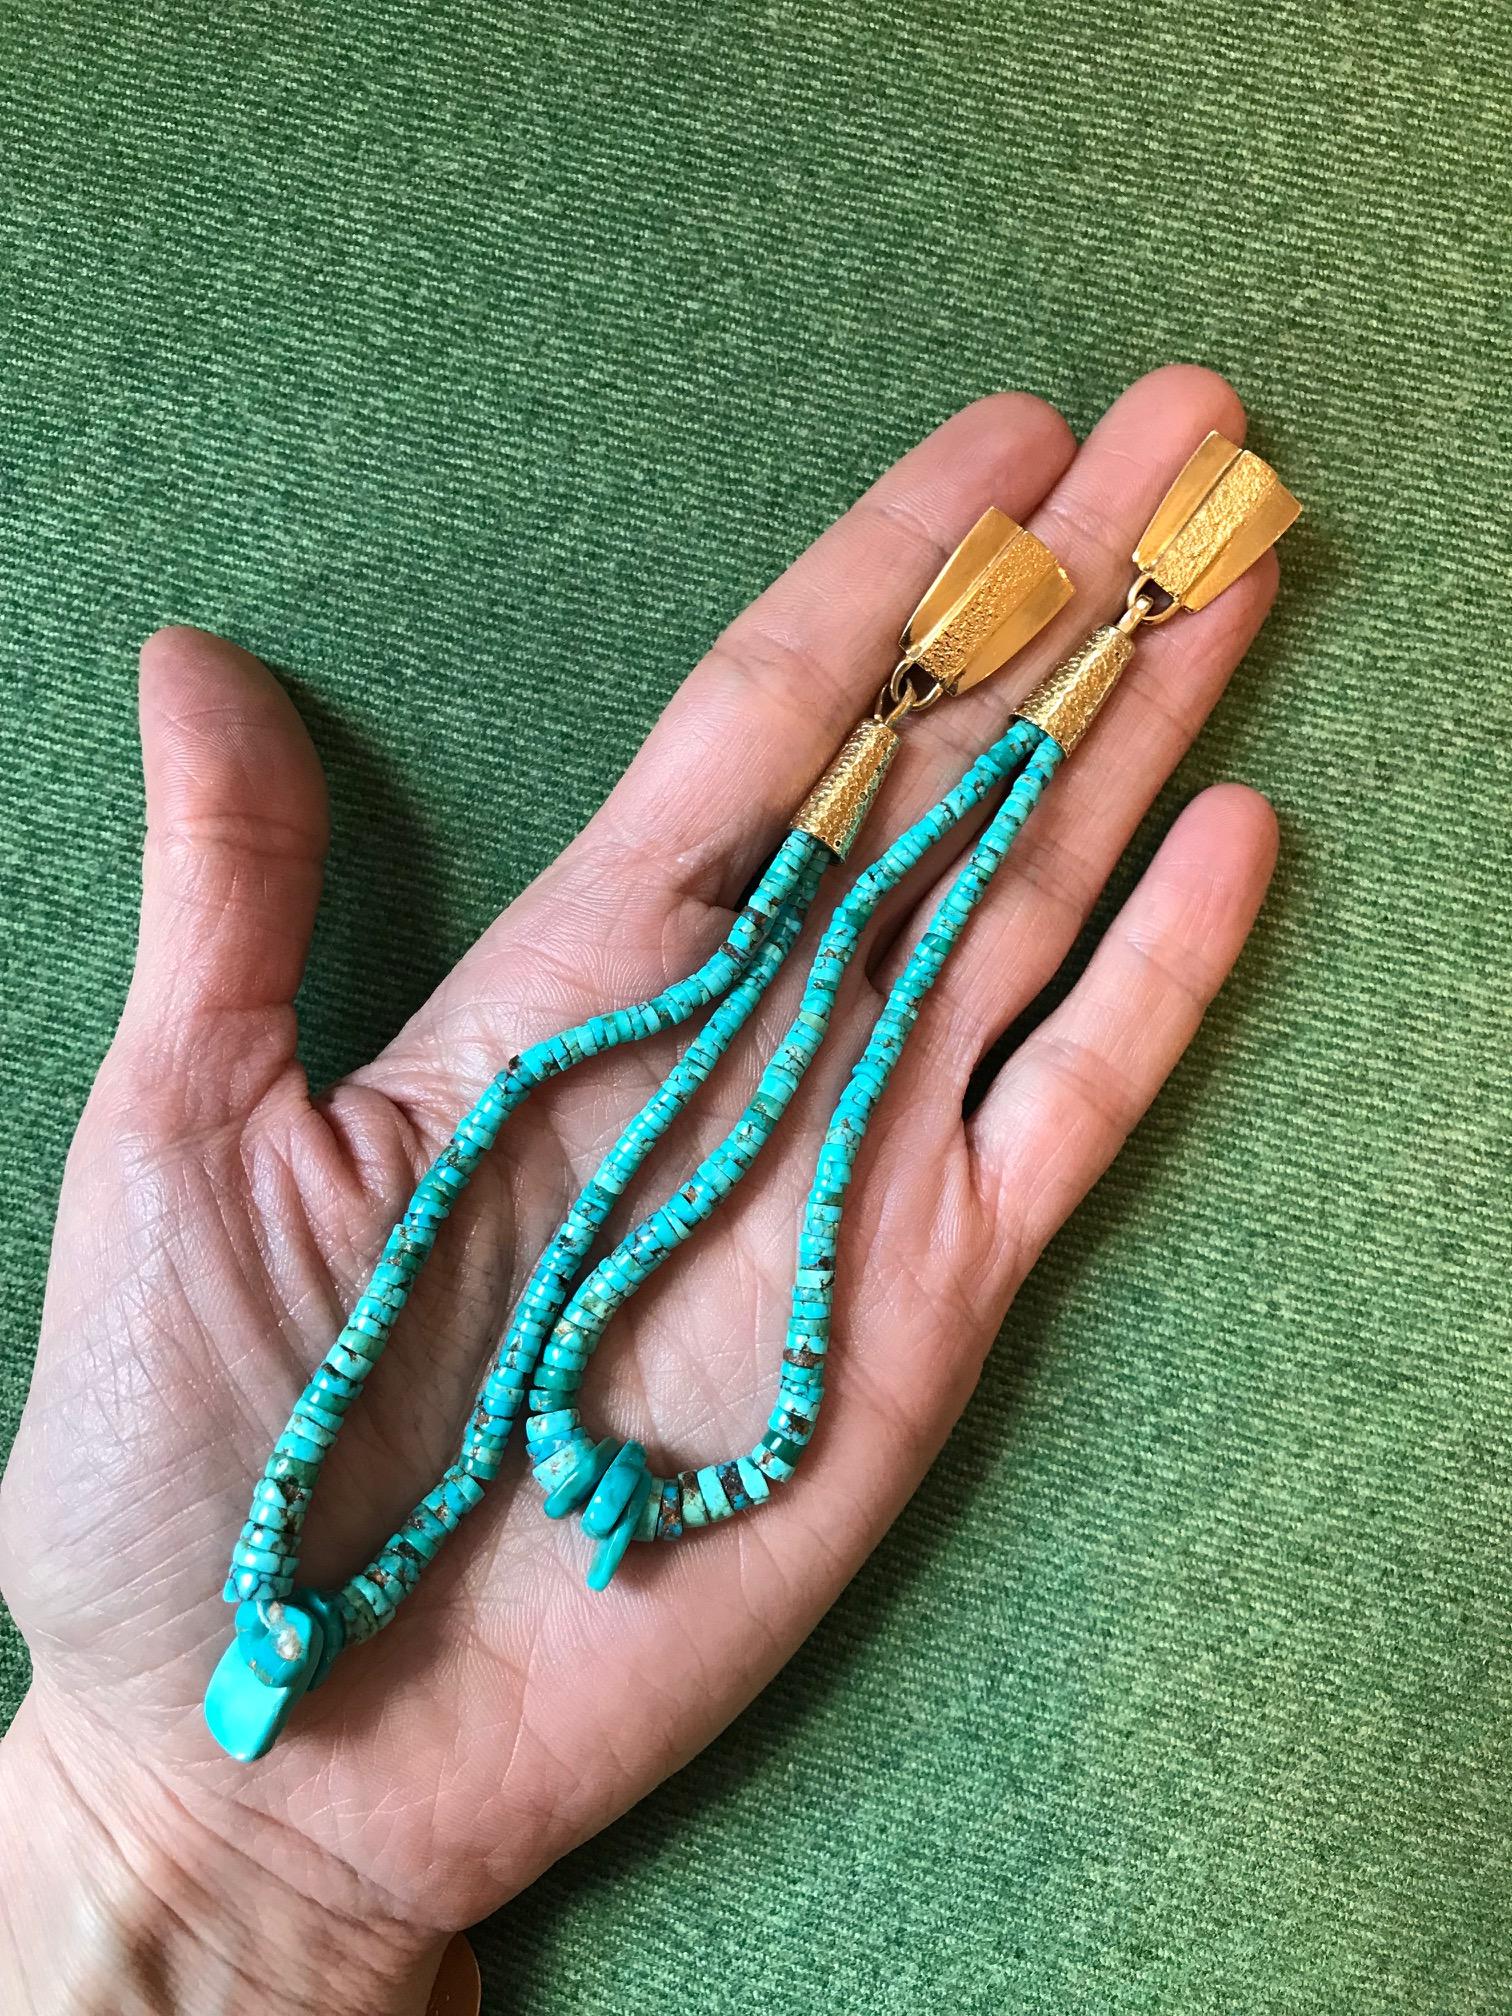 A pair of fine turquoise heishi bead jacla and 18 karat gold earrings, by Verma Nequatewa (Sonwai), 2016

The earrings are stamped 18K, Sonwai.

Sonwai is the niece and acknowledged protege of major modernist jeweler, Charles Loloma. In 2018, the